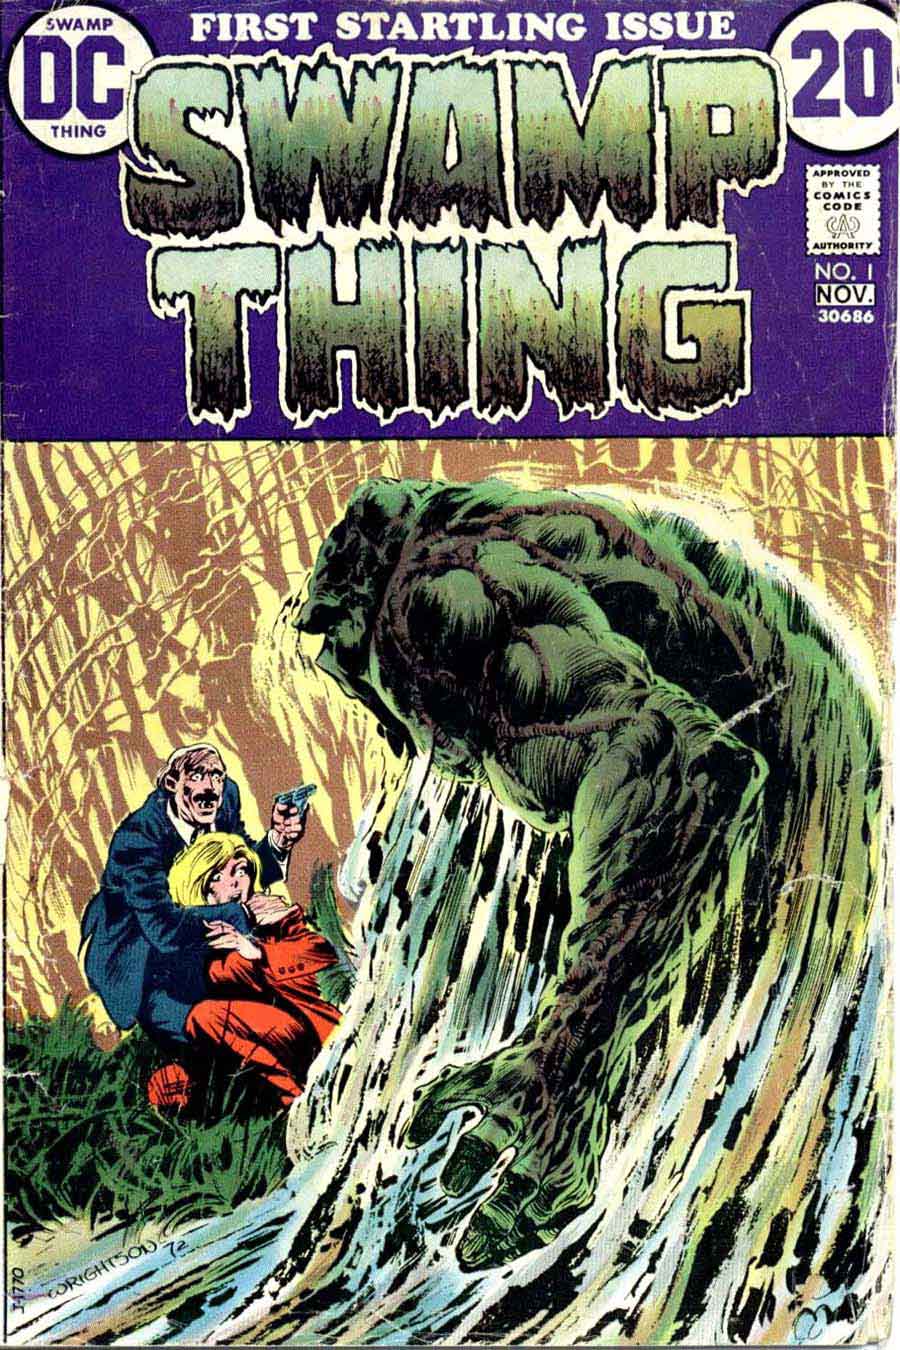 Swamp Thing #1 bronze age 1970s dc comic book cover art by Bernie Wrightson